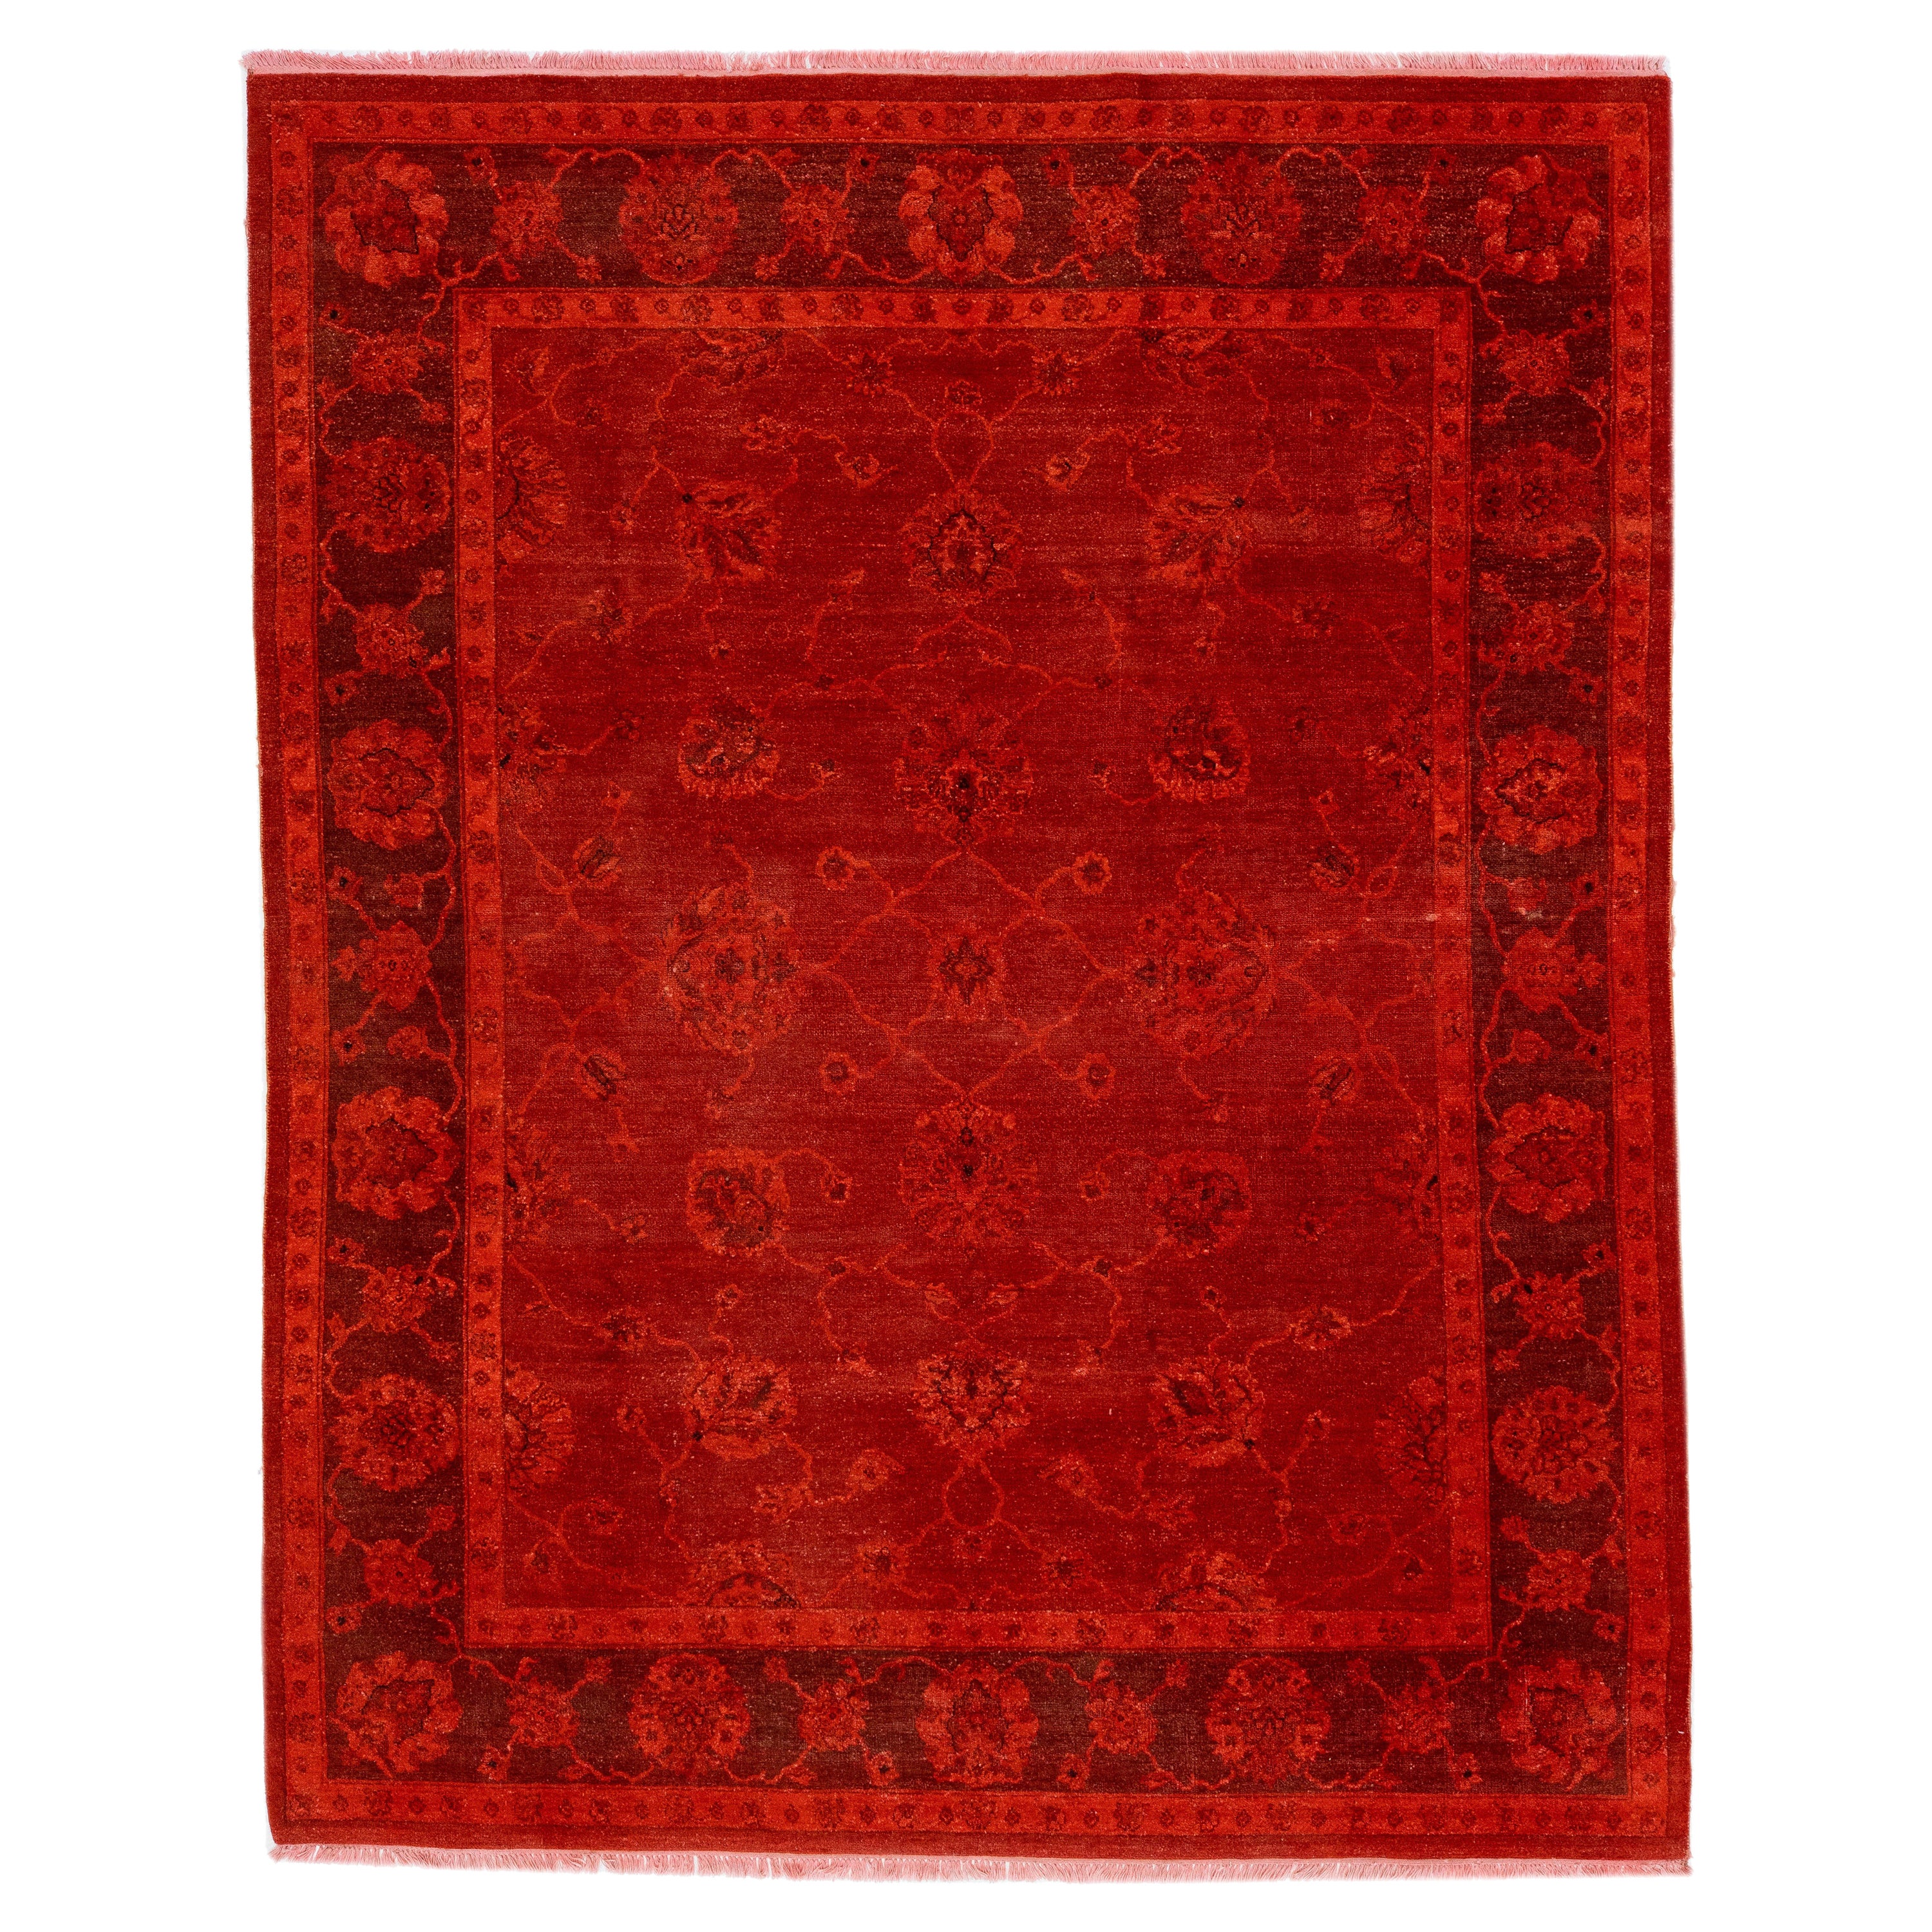 Handmade Overdye Red Modern Art & Crafts Wool Rug with a Floral Pattern